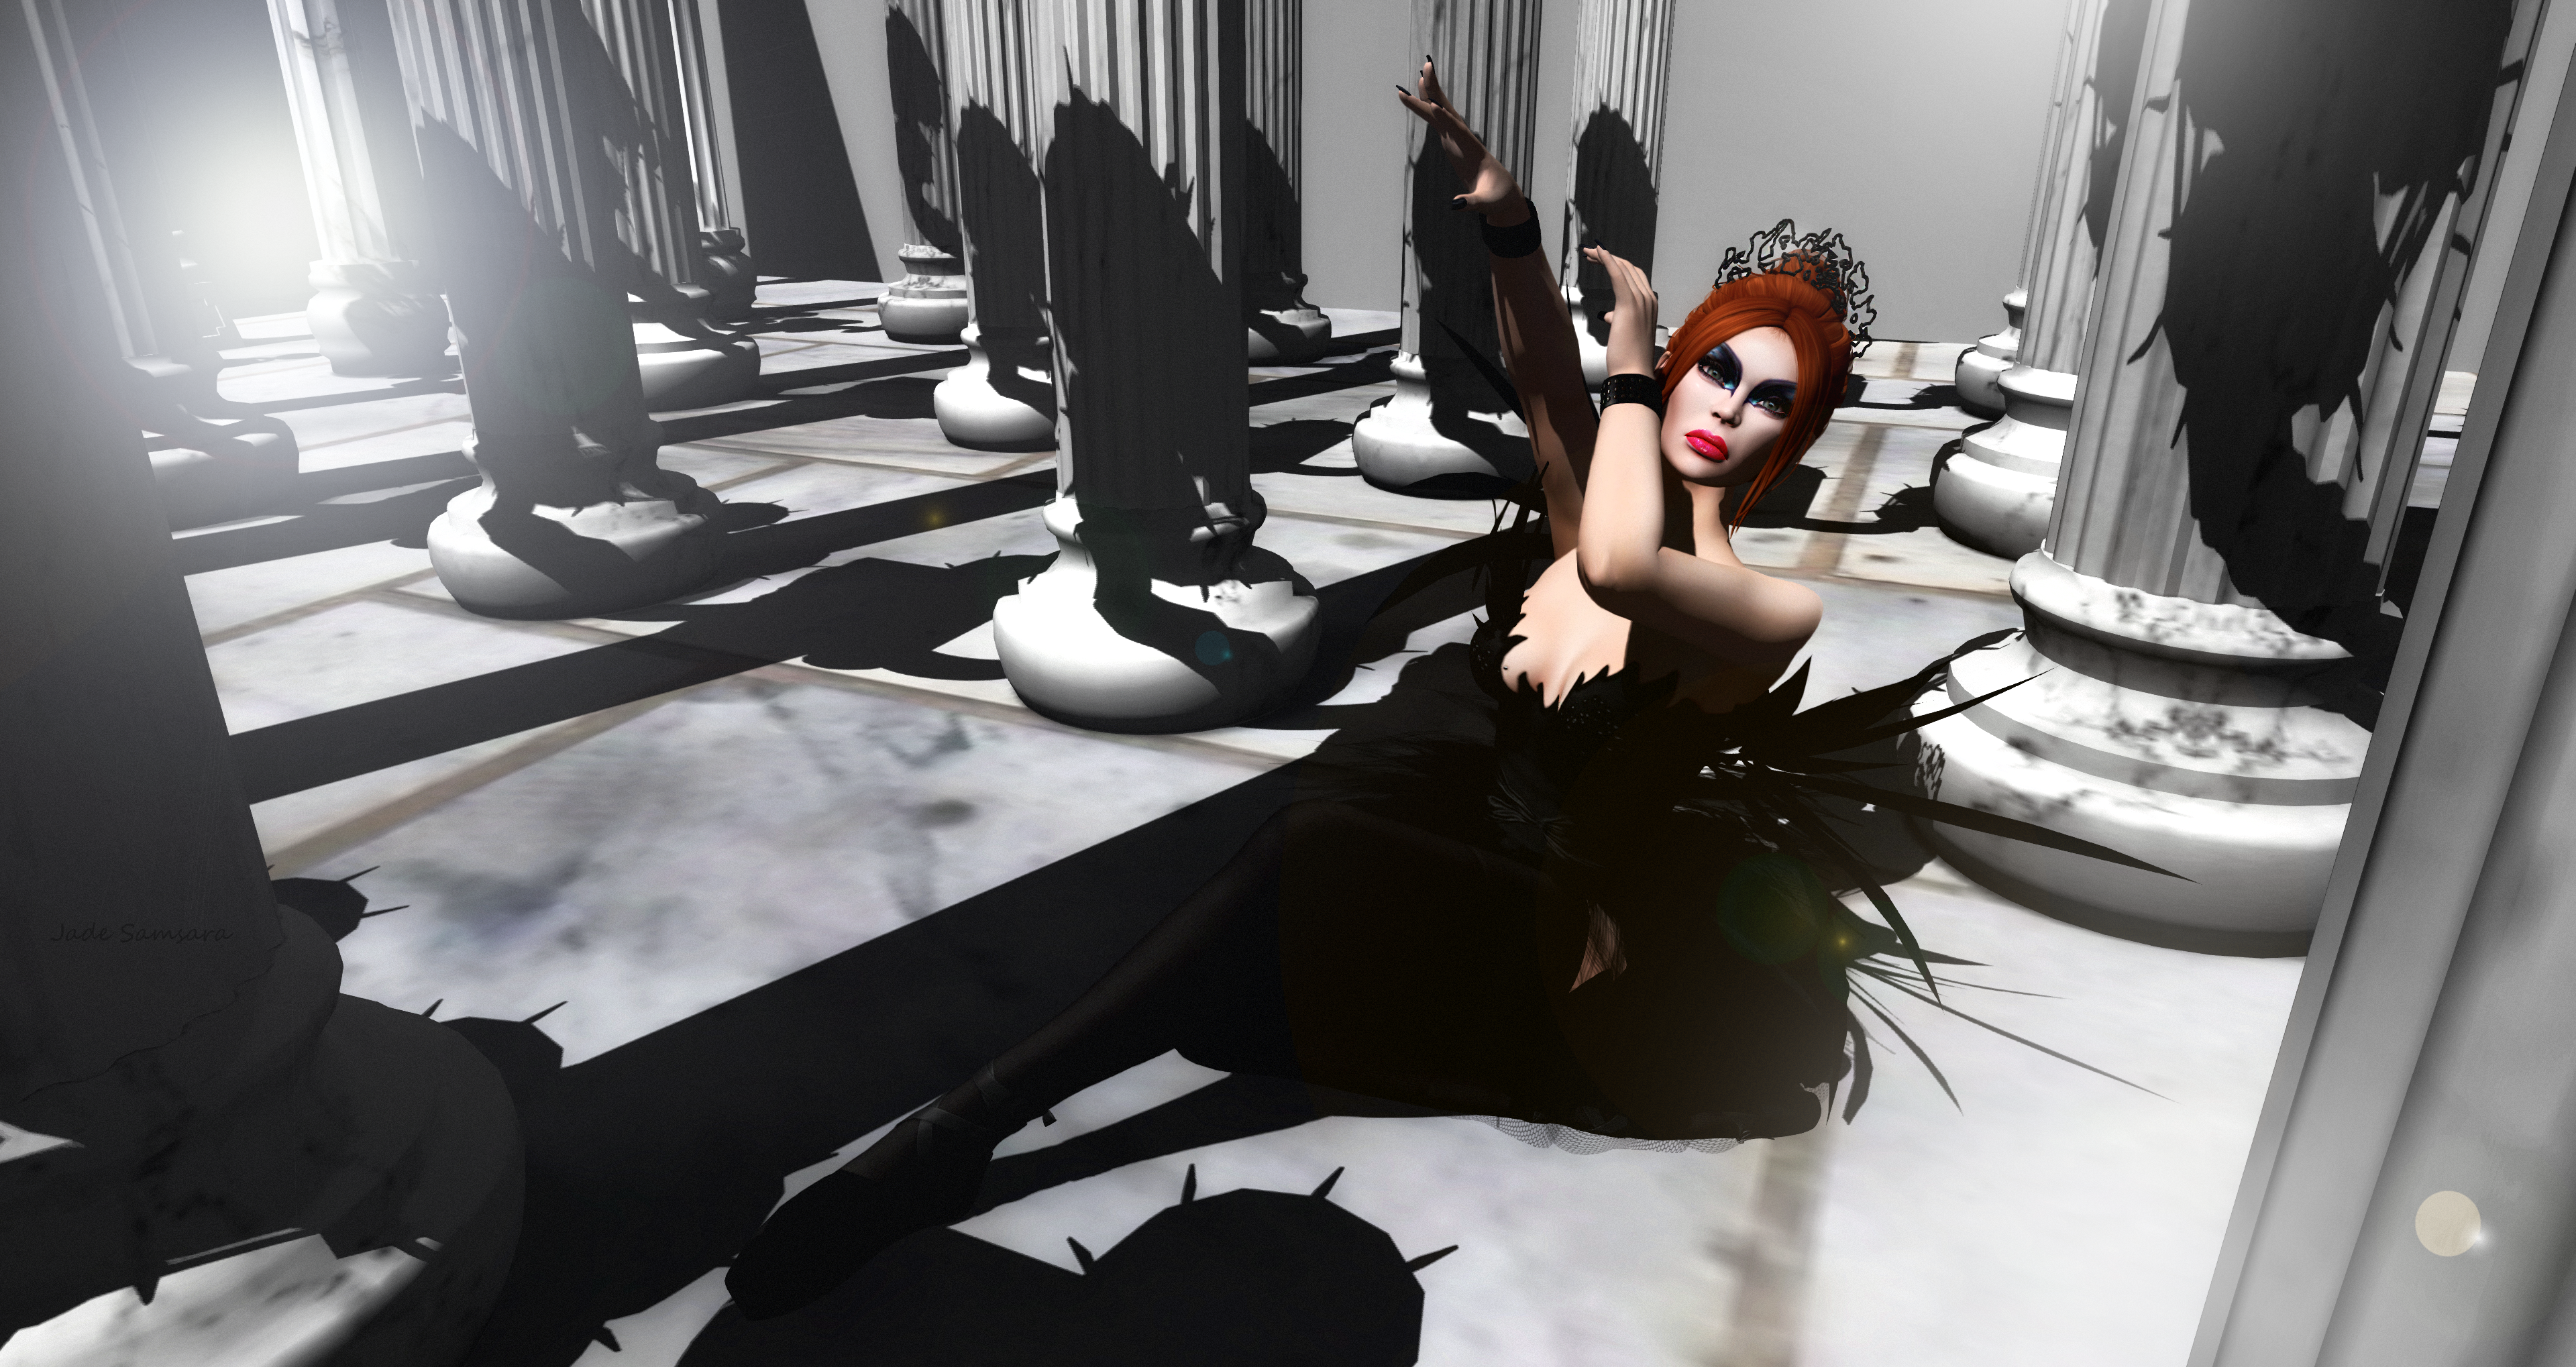 The Black Swan's Song - Featuring Virtual Diva, Truth and Petit Chat